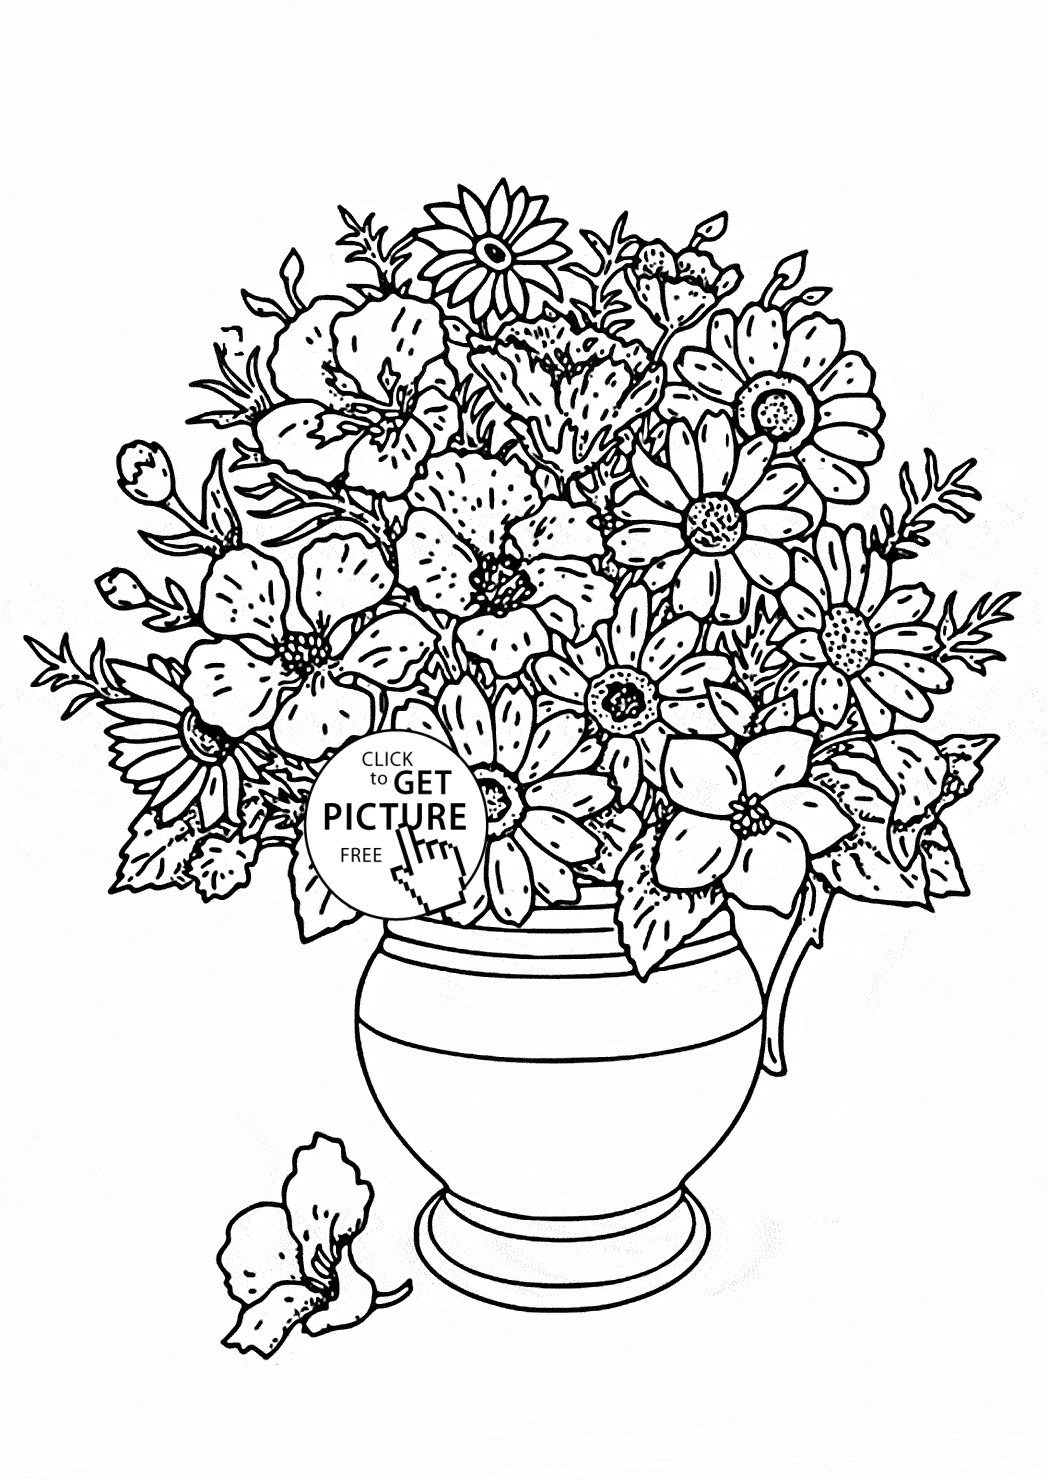 coloring pages flowers in vase flower vase coloring page coloring pages for grown ups in flowers vase coloring pages 